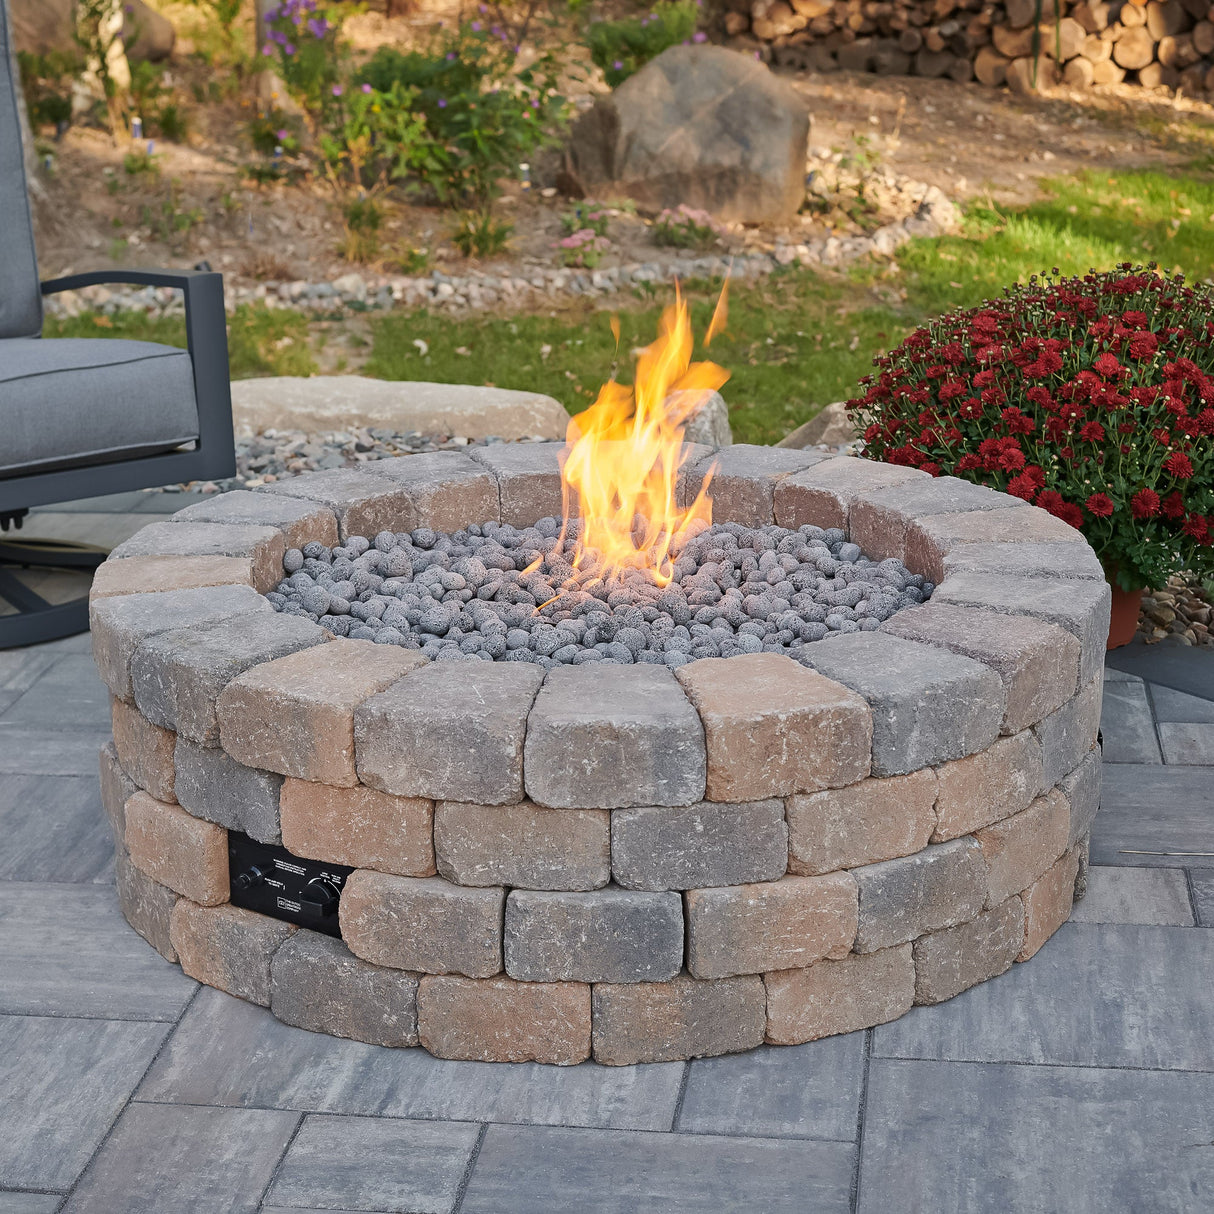 The Bronson Block Round Gas Fire Pit Kit in an outdoor setting with a large flame